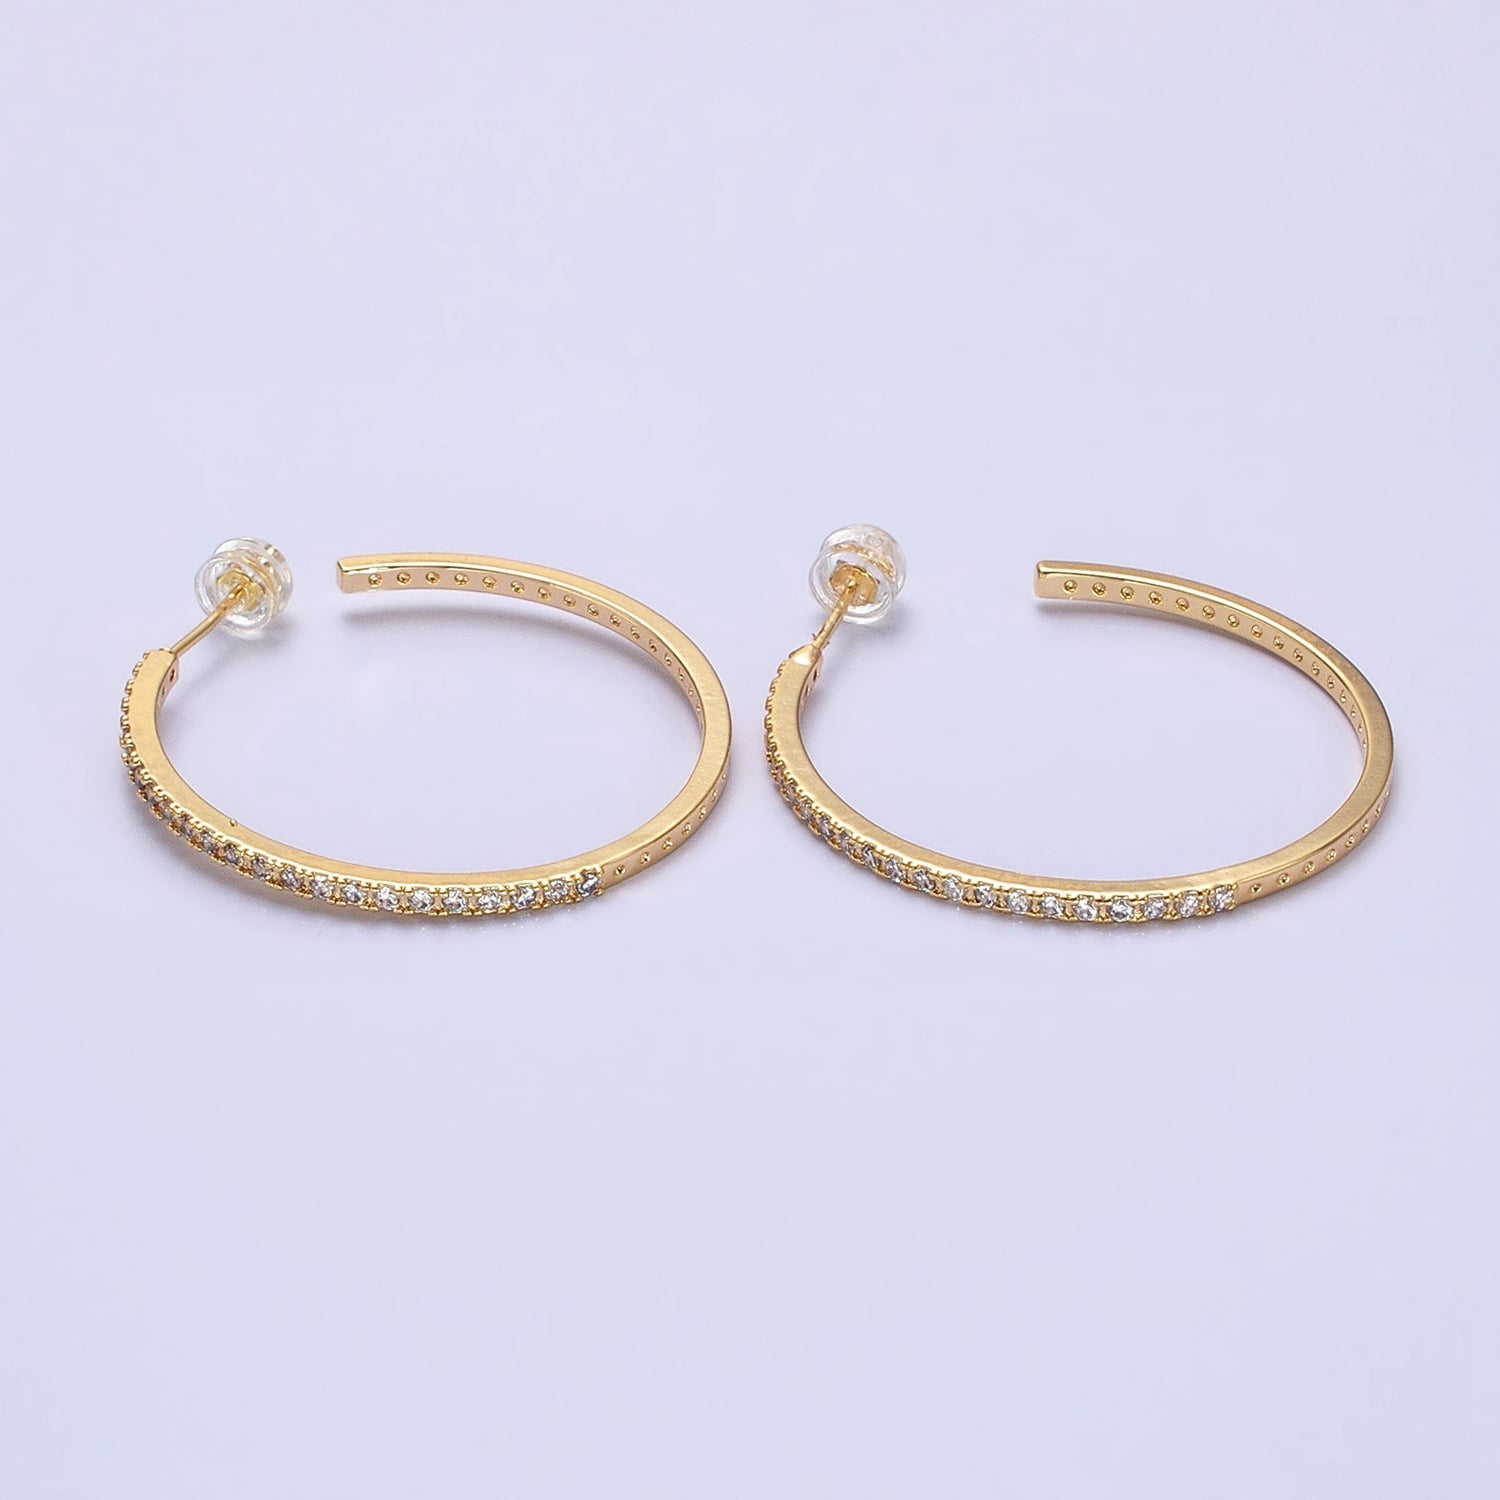 Minimalist Gold Hoop Earring with CZ Stone Simple Silver Hoop Earring for Everyday Use AB674 AB677